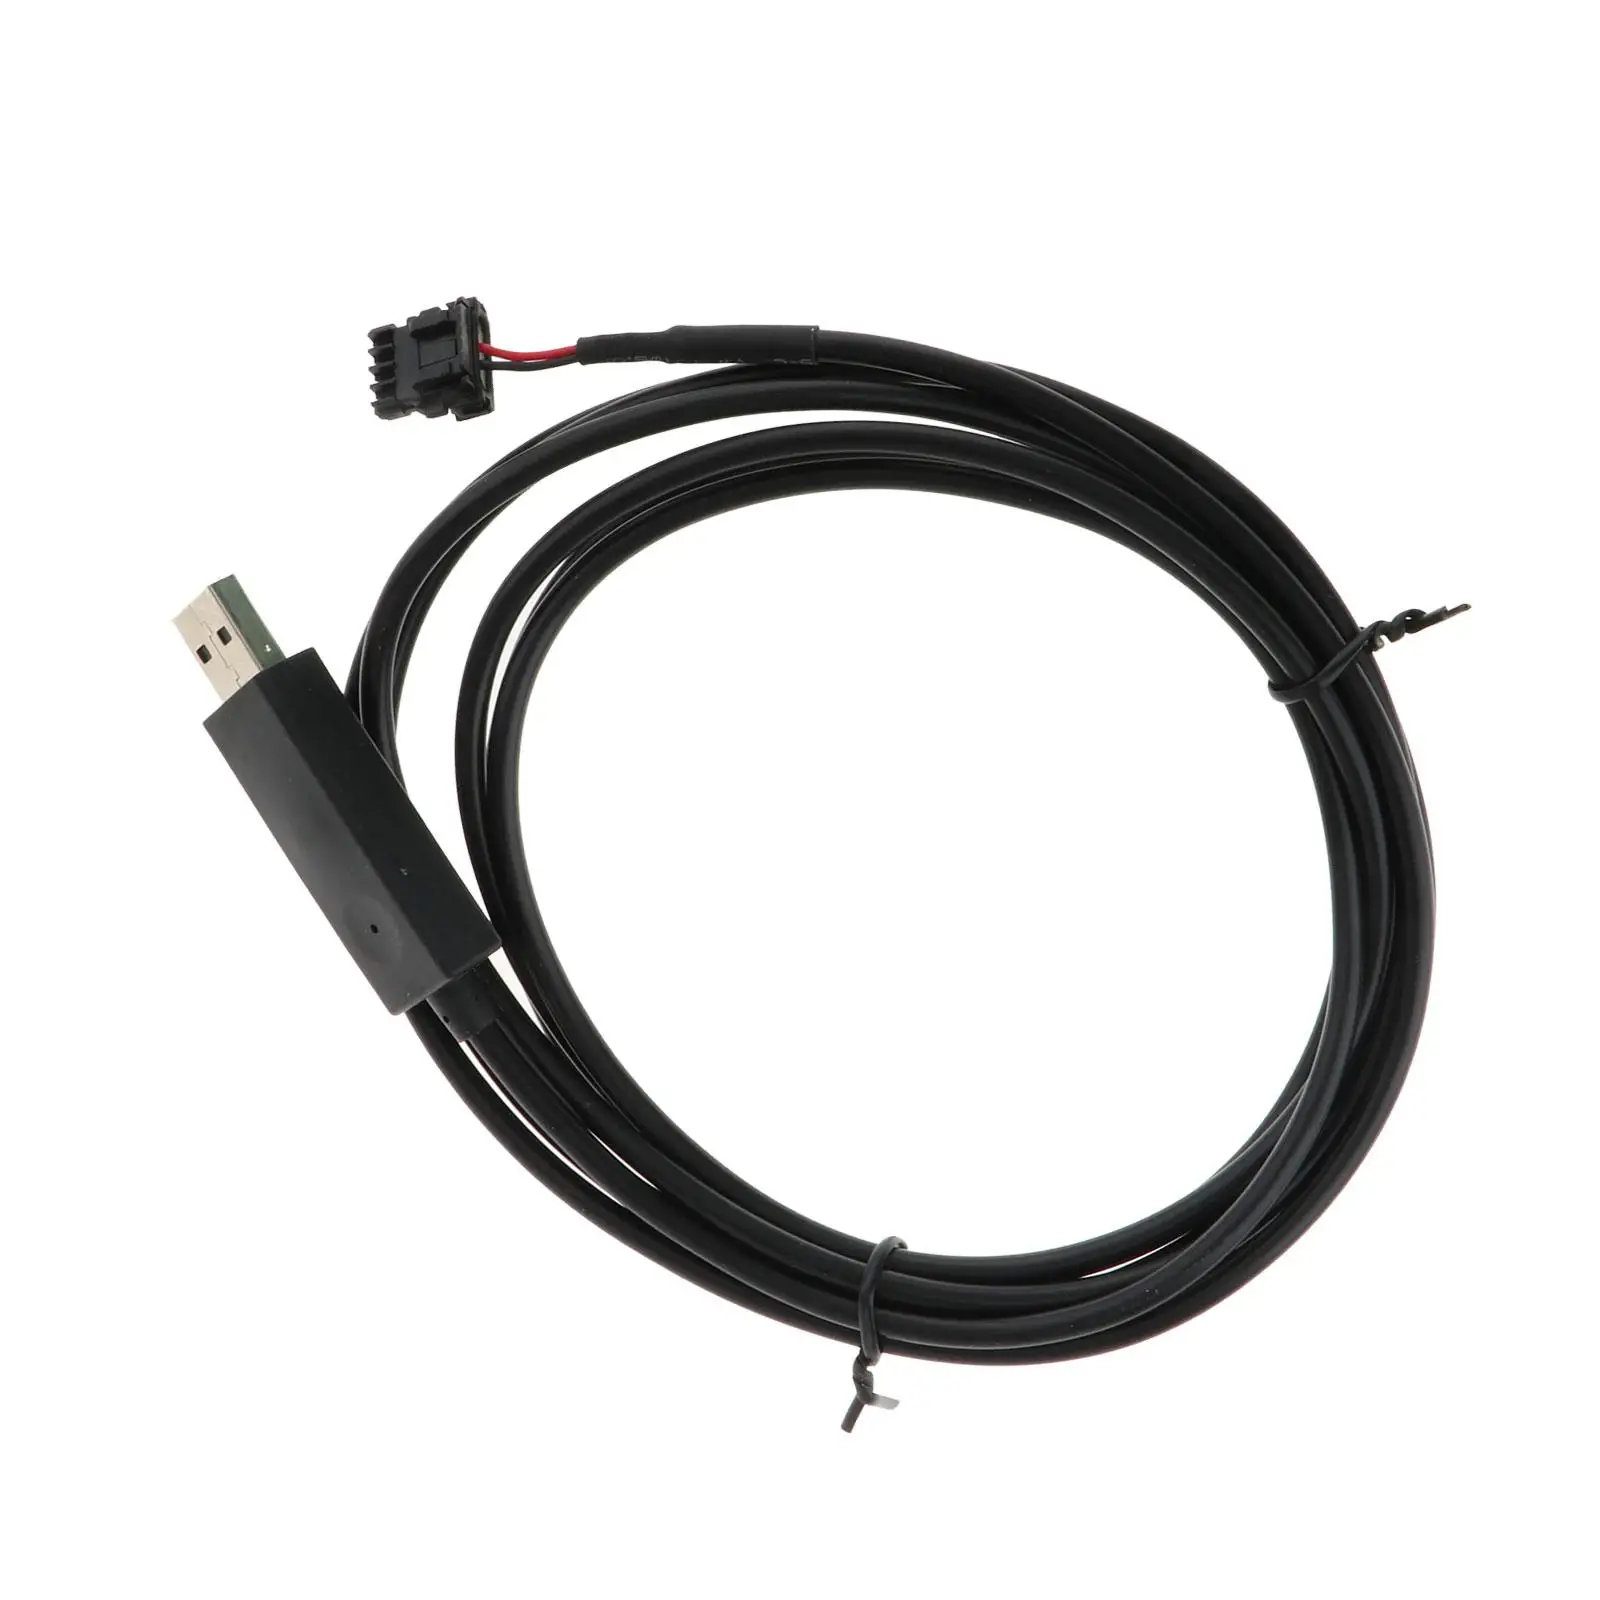 USB Can Cable 558-443 Double Ended Durable Repair Accessories Harness Y Splitter Cable for Holley Sniper Efi Erminator x